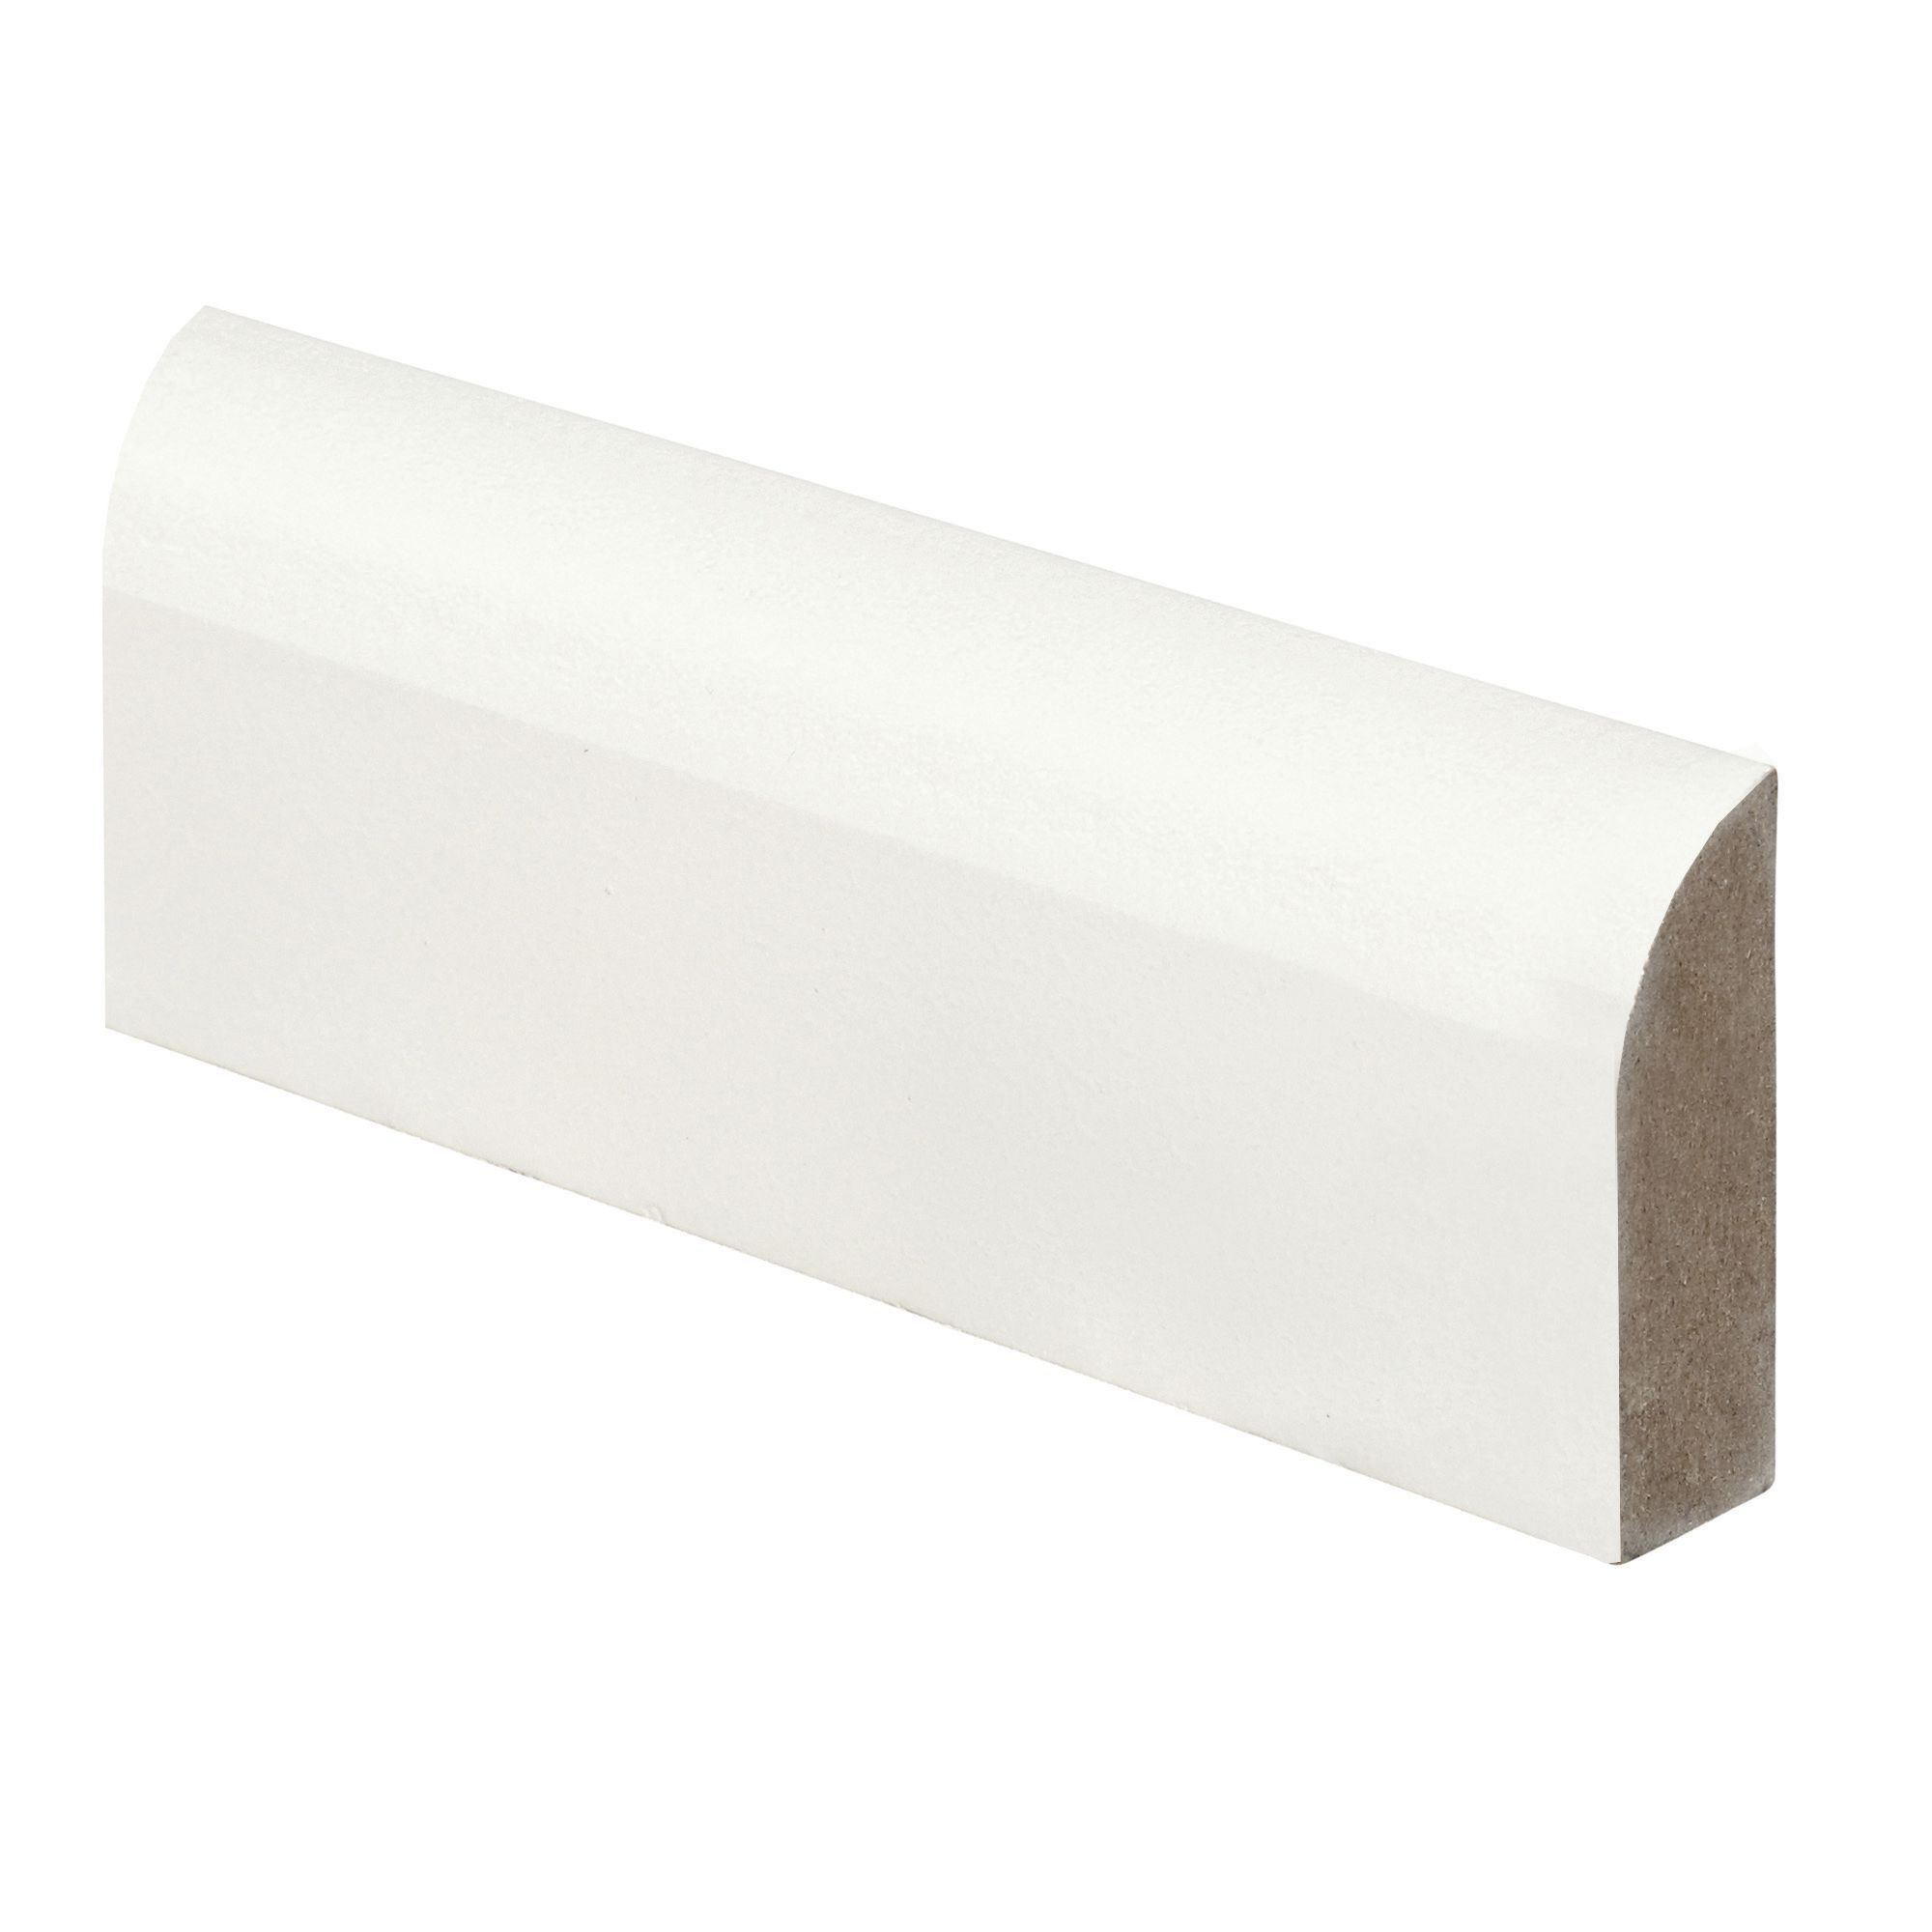 Image of Wickes Large Round Fully Finished MDF Architrave - 14.5mm x 44mm x 2.1m Pack of 5